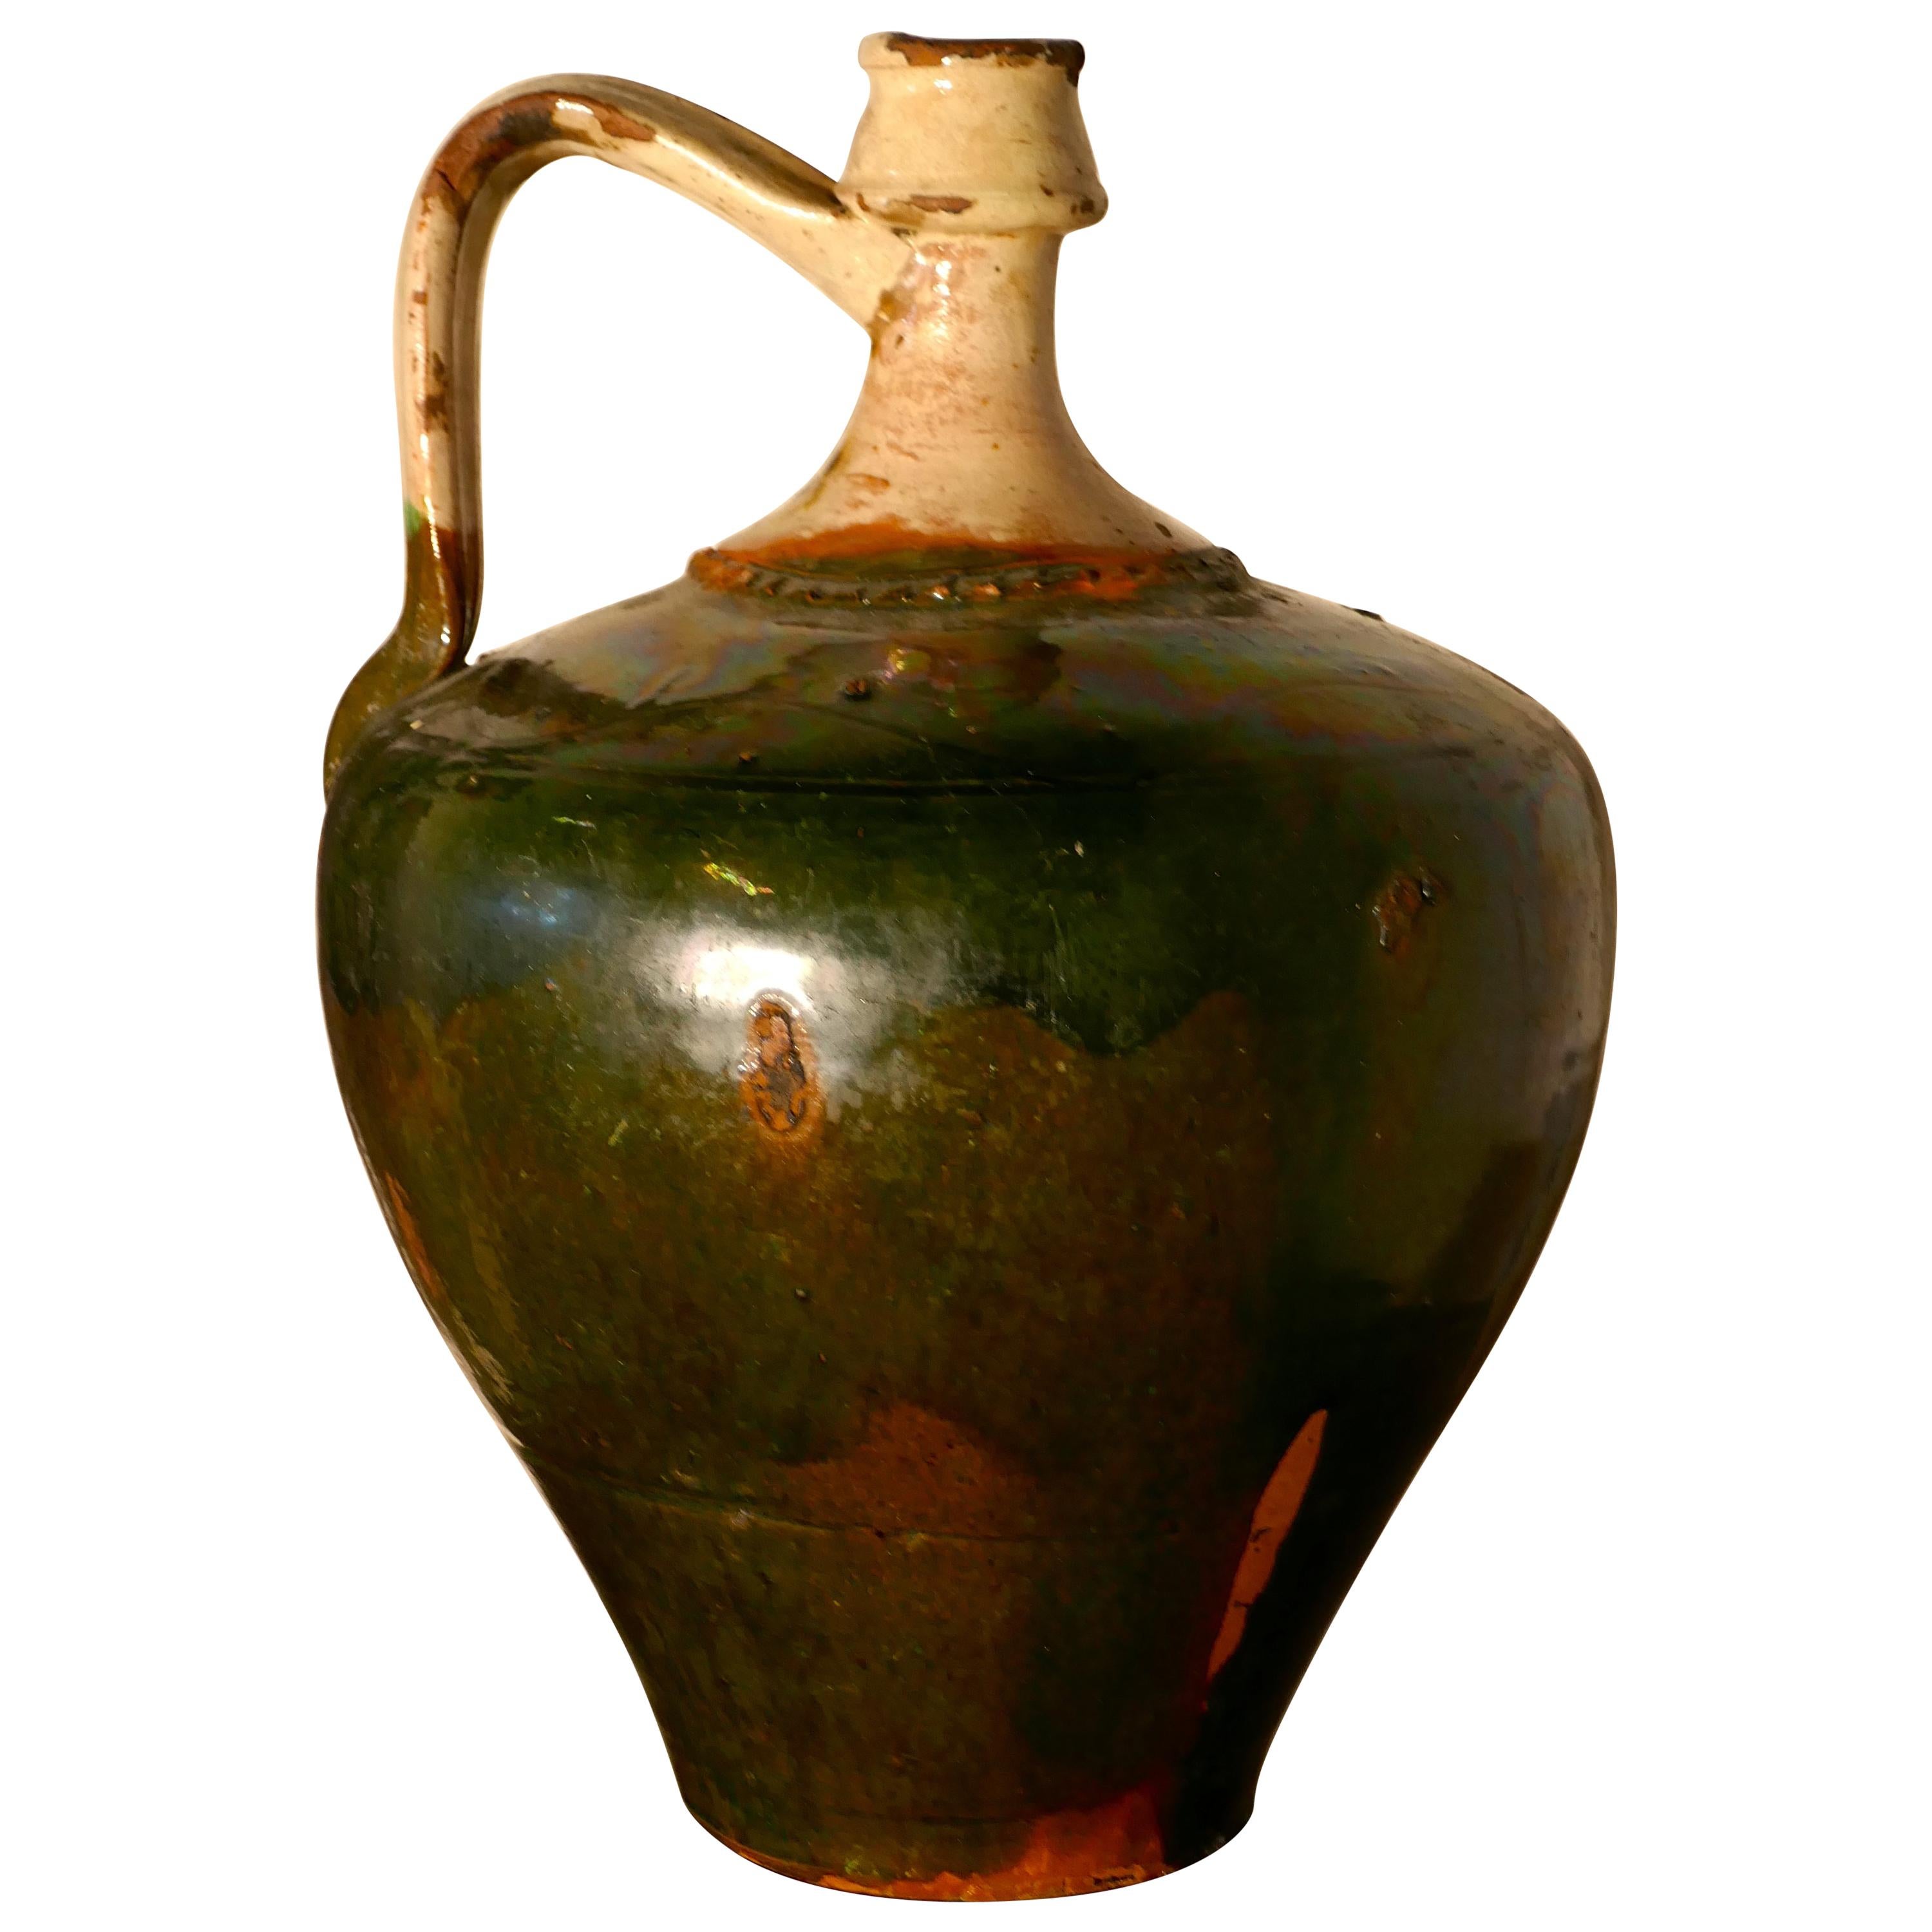 19th Century Terracotta Olive Oil Jug from Portugal